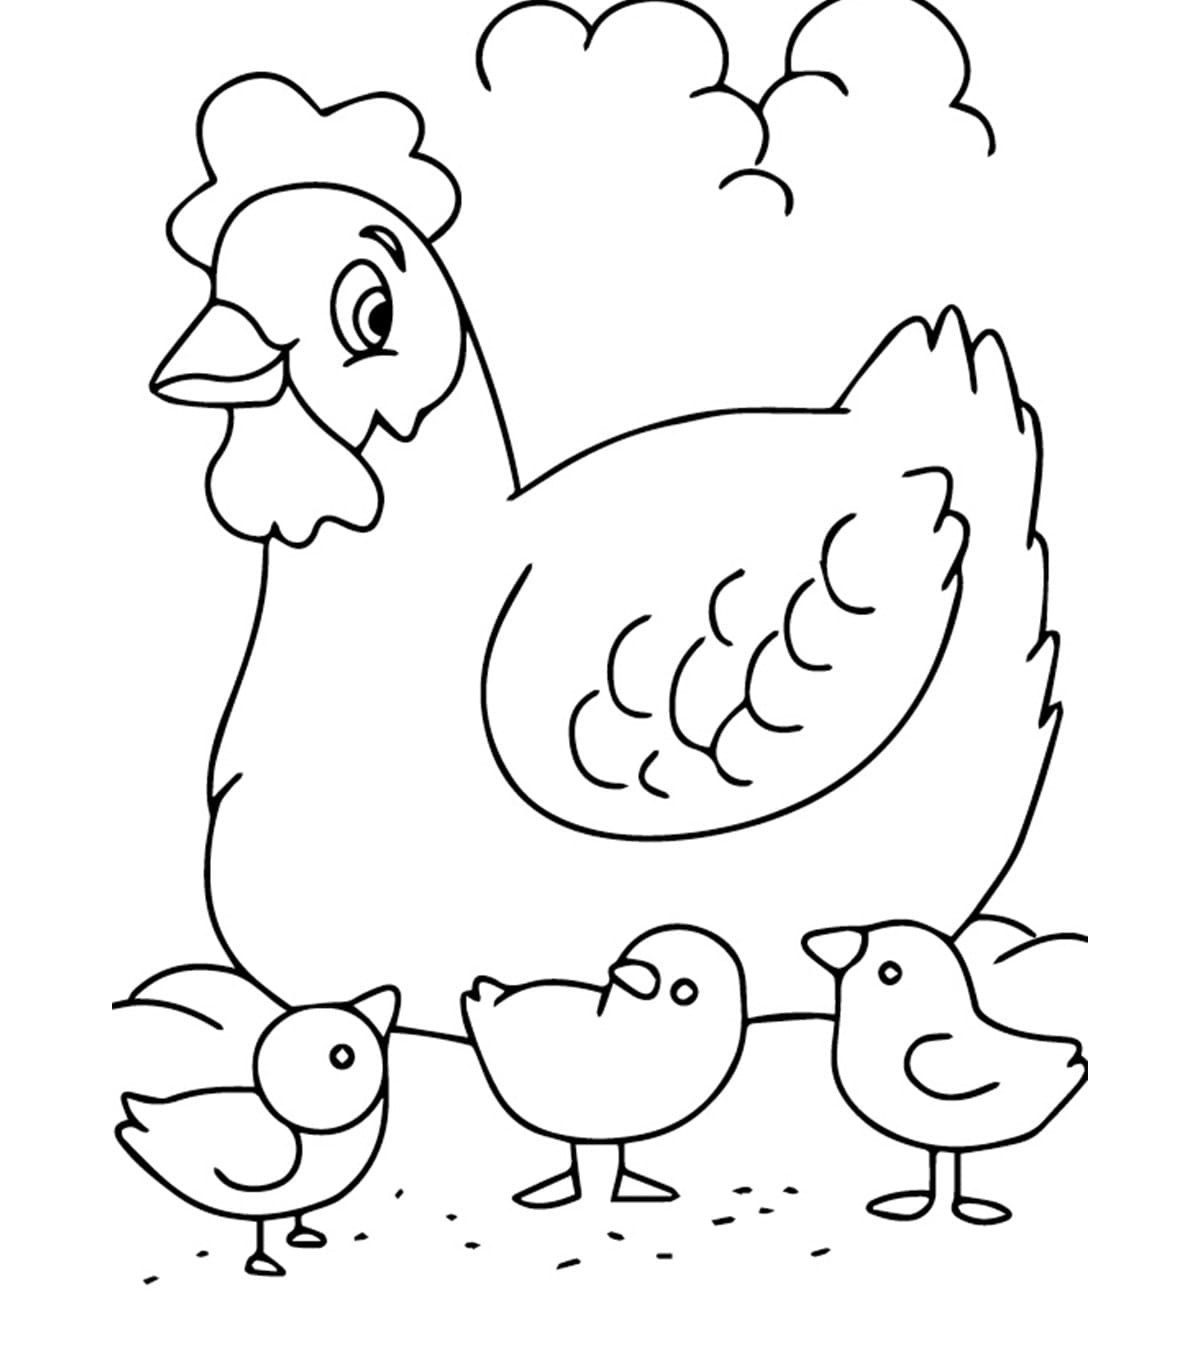 farm-animals-coloring-pages-100-free-coloring-pages-for-kids